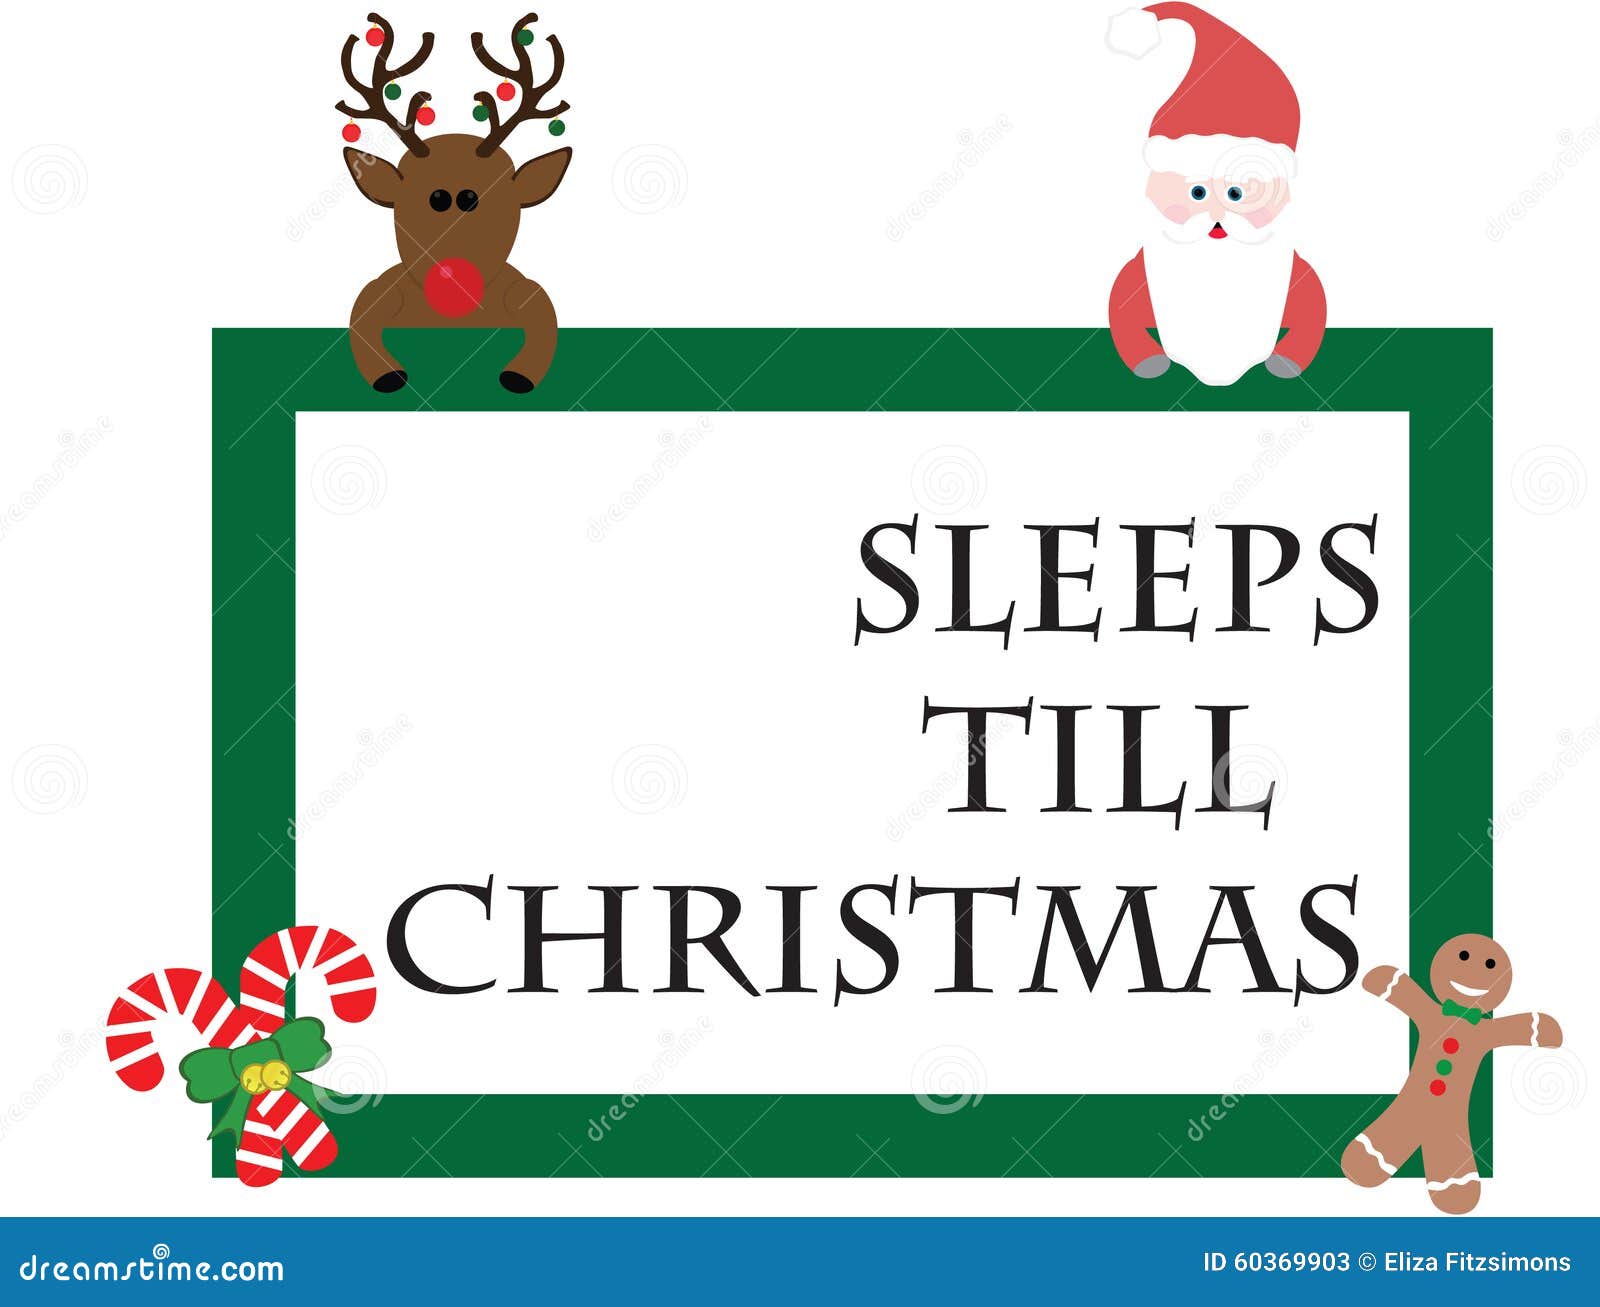 Image result for sleeps till christmas images